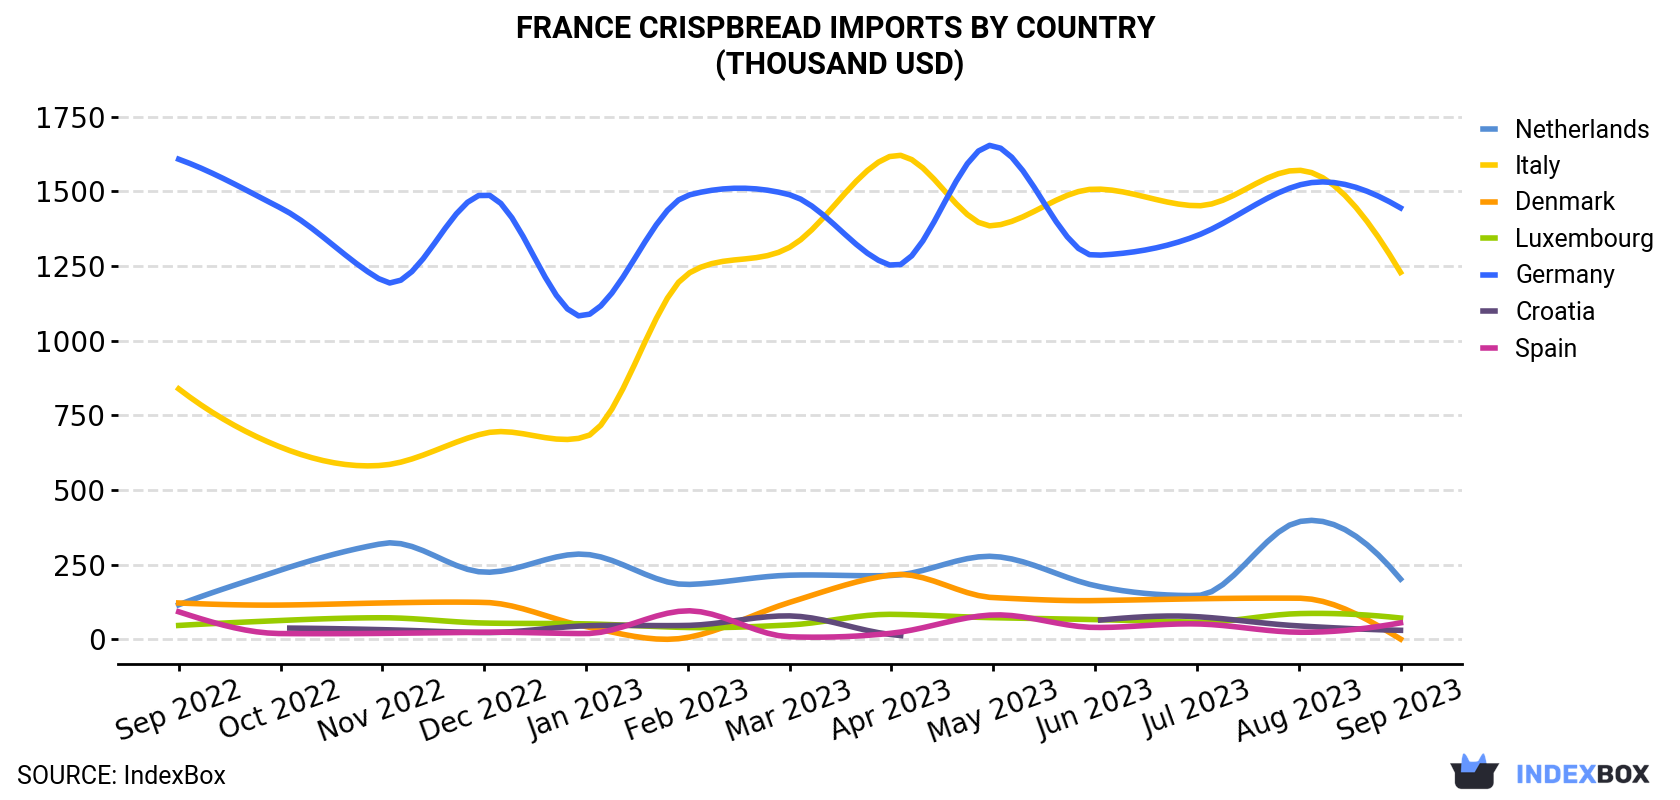 France Crispbread Imports By Country (Thousand USD)